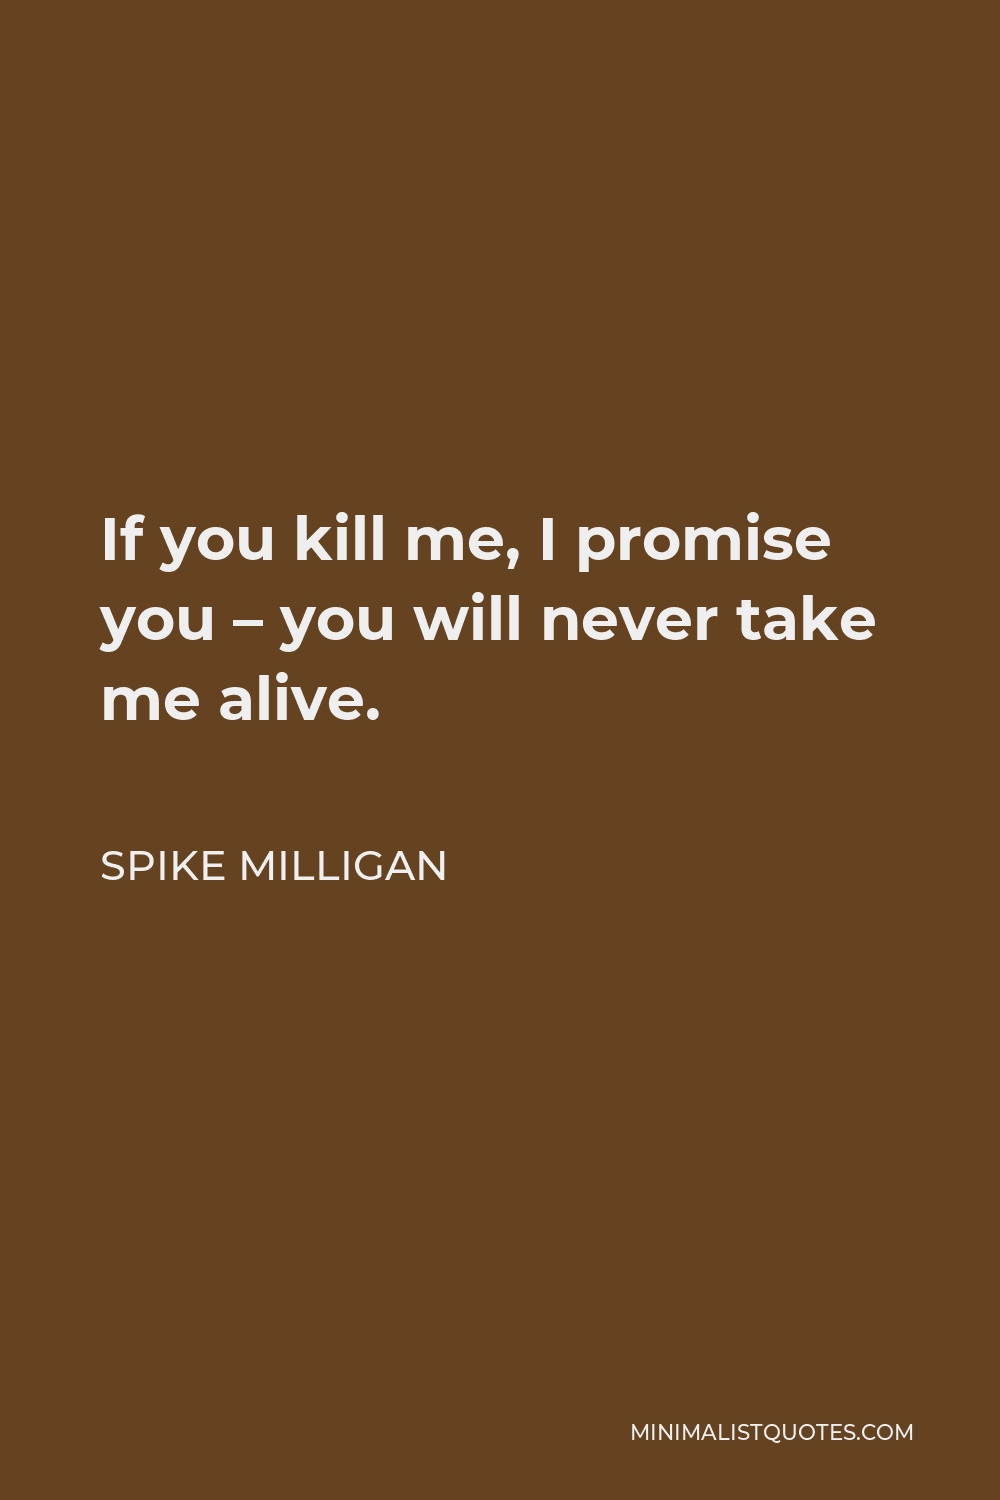 Spike Milligan Quote - If you kill me, I promise you – you will never take me alive.